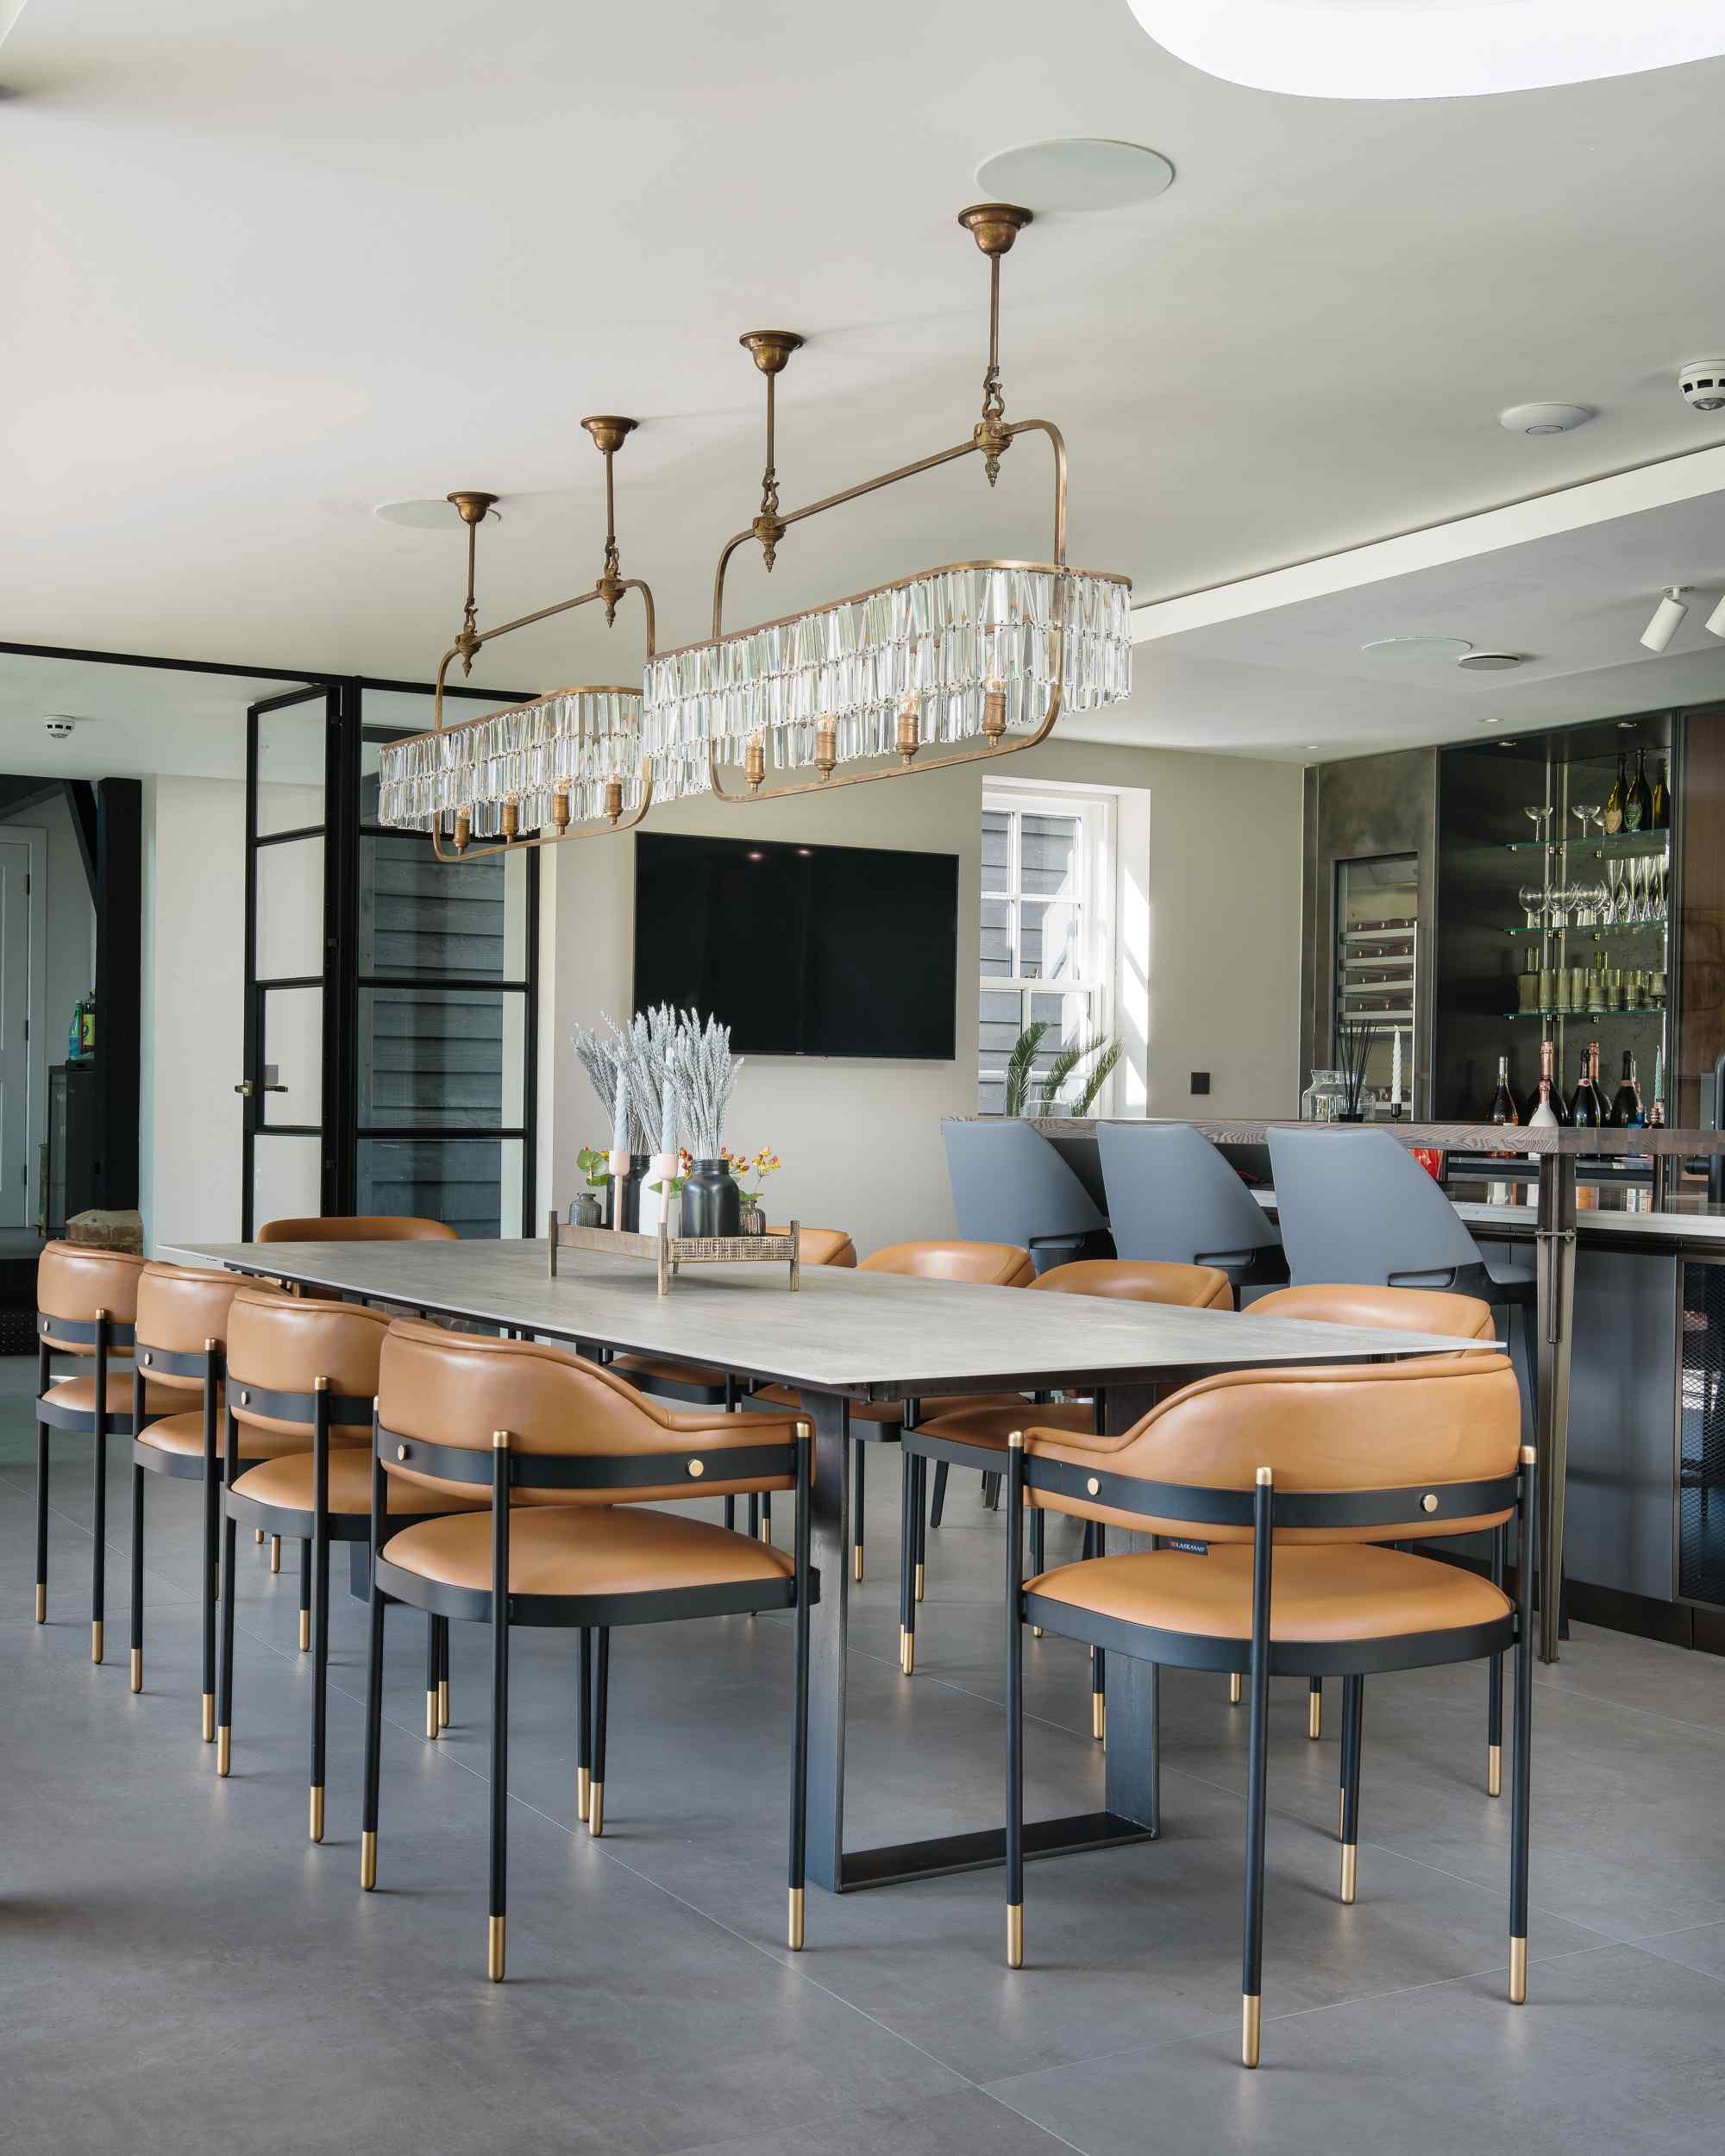 matching dining chairs and bar stools